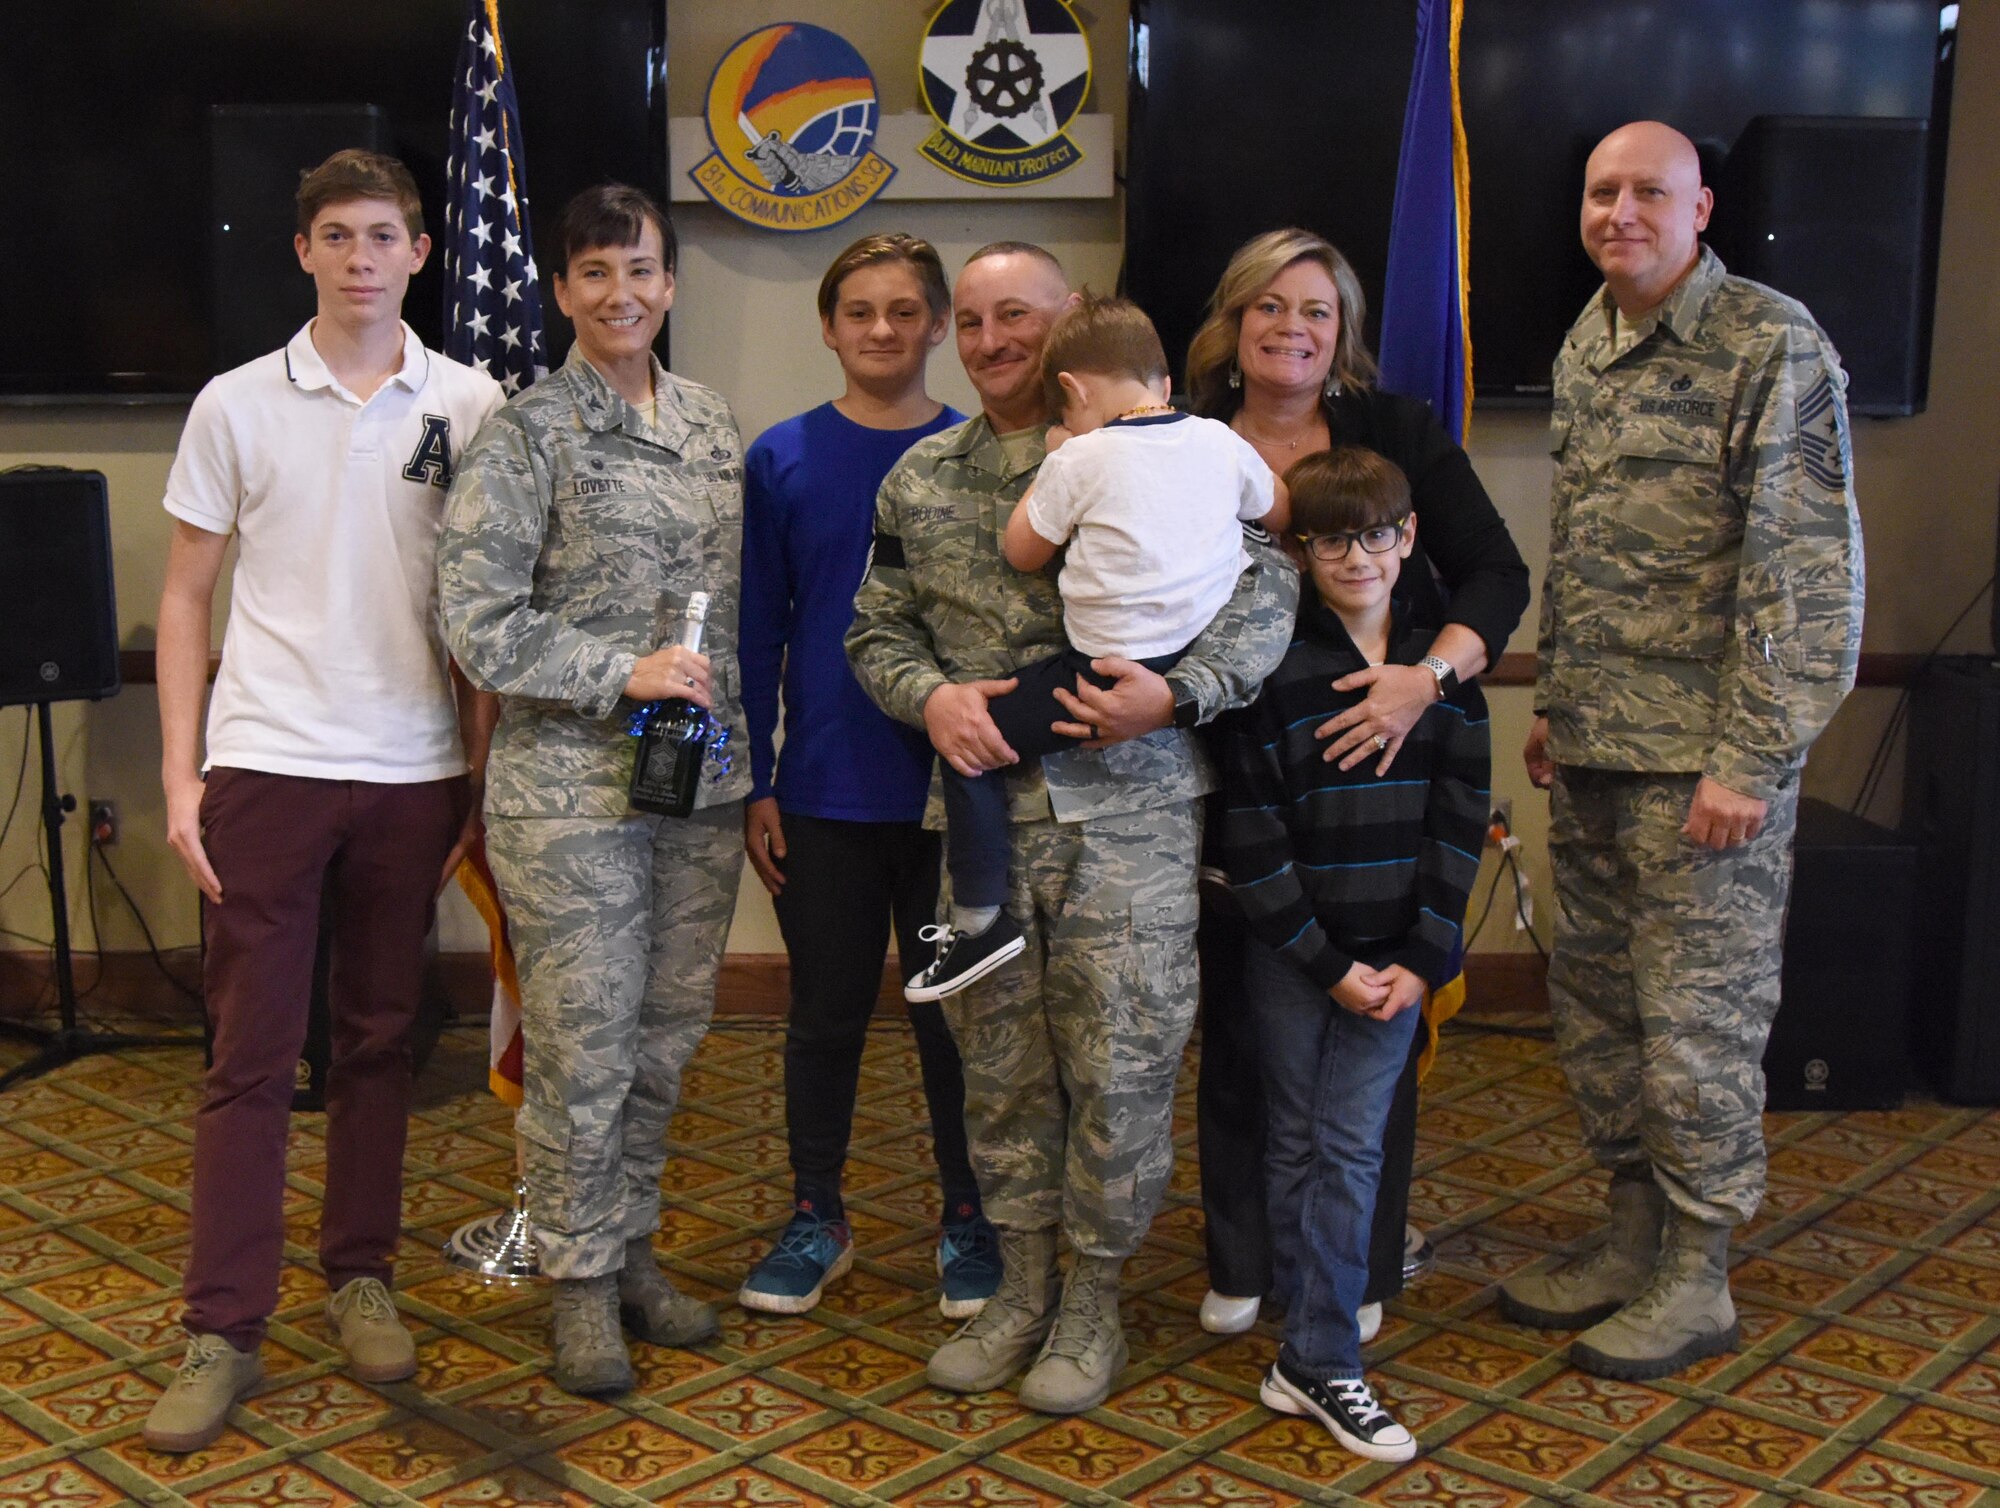 U.S. Air Force Col. Debra Lovette, 81st Training Wing commander, and Chief Master Sgt. David Pizzuto, 81st TRW command chief, presents Senior Master Sgt. Andrew Bodine, 81st Training Group military training superintendent, and his family with a memento for his promotion to the rank of chief master sergeant at Keesler Air Force Base, Mississippi, Dec. 6, 2018. Five senior master sgts. at Keesler were selected for promotion. (U.S. Air Force photo by Kemberly Groue)